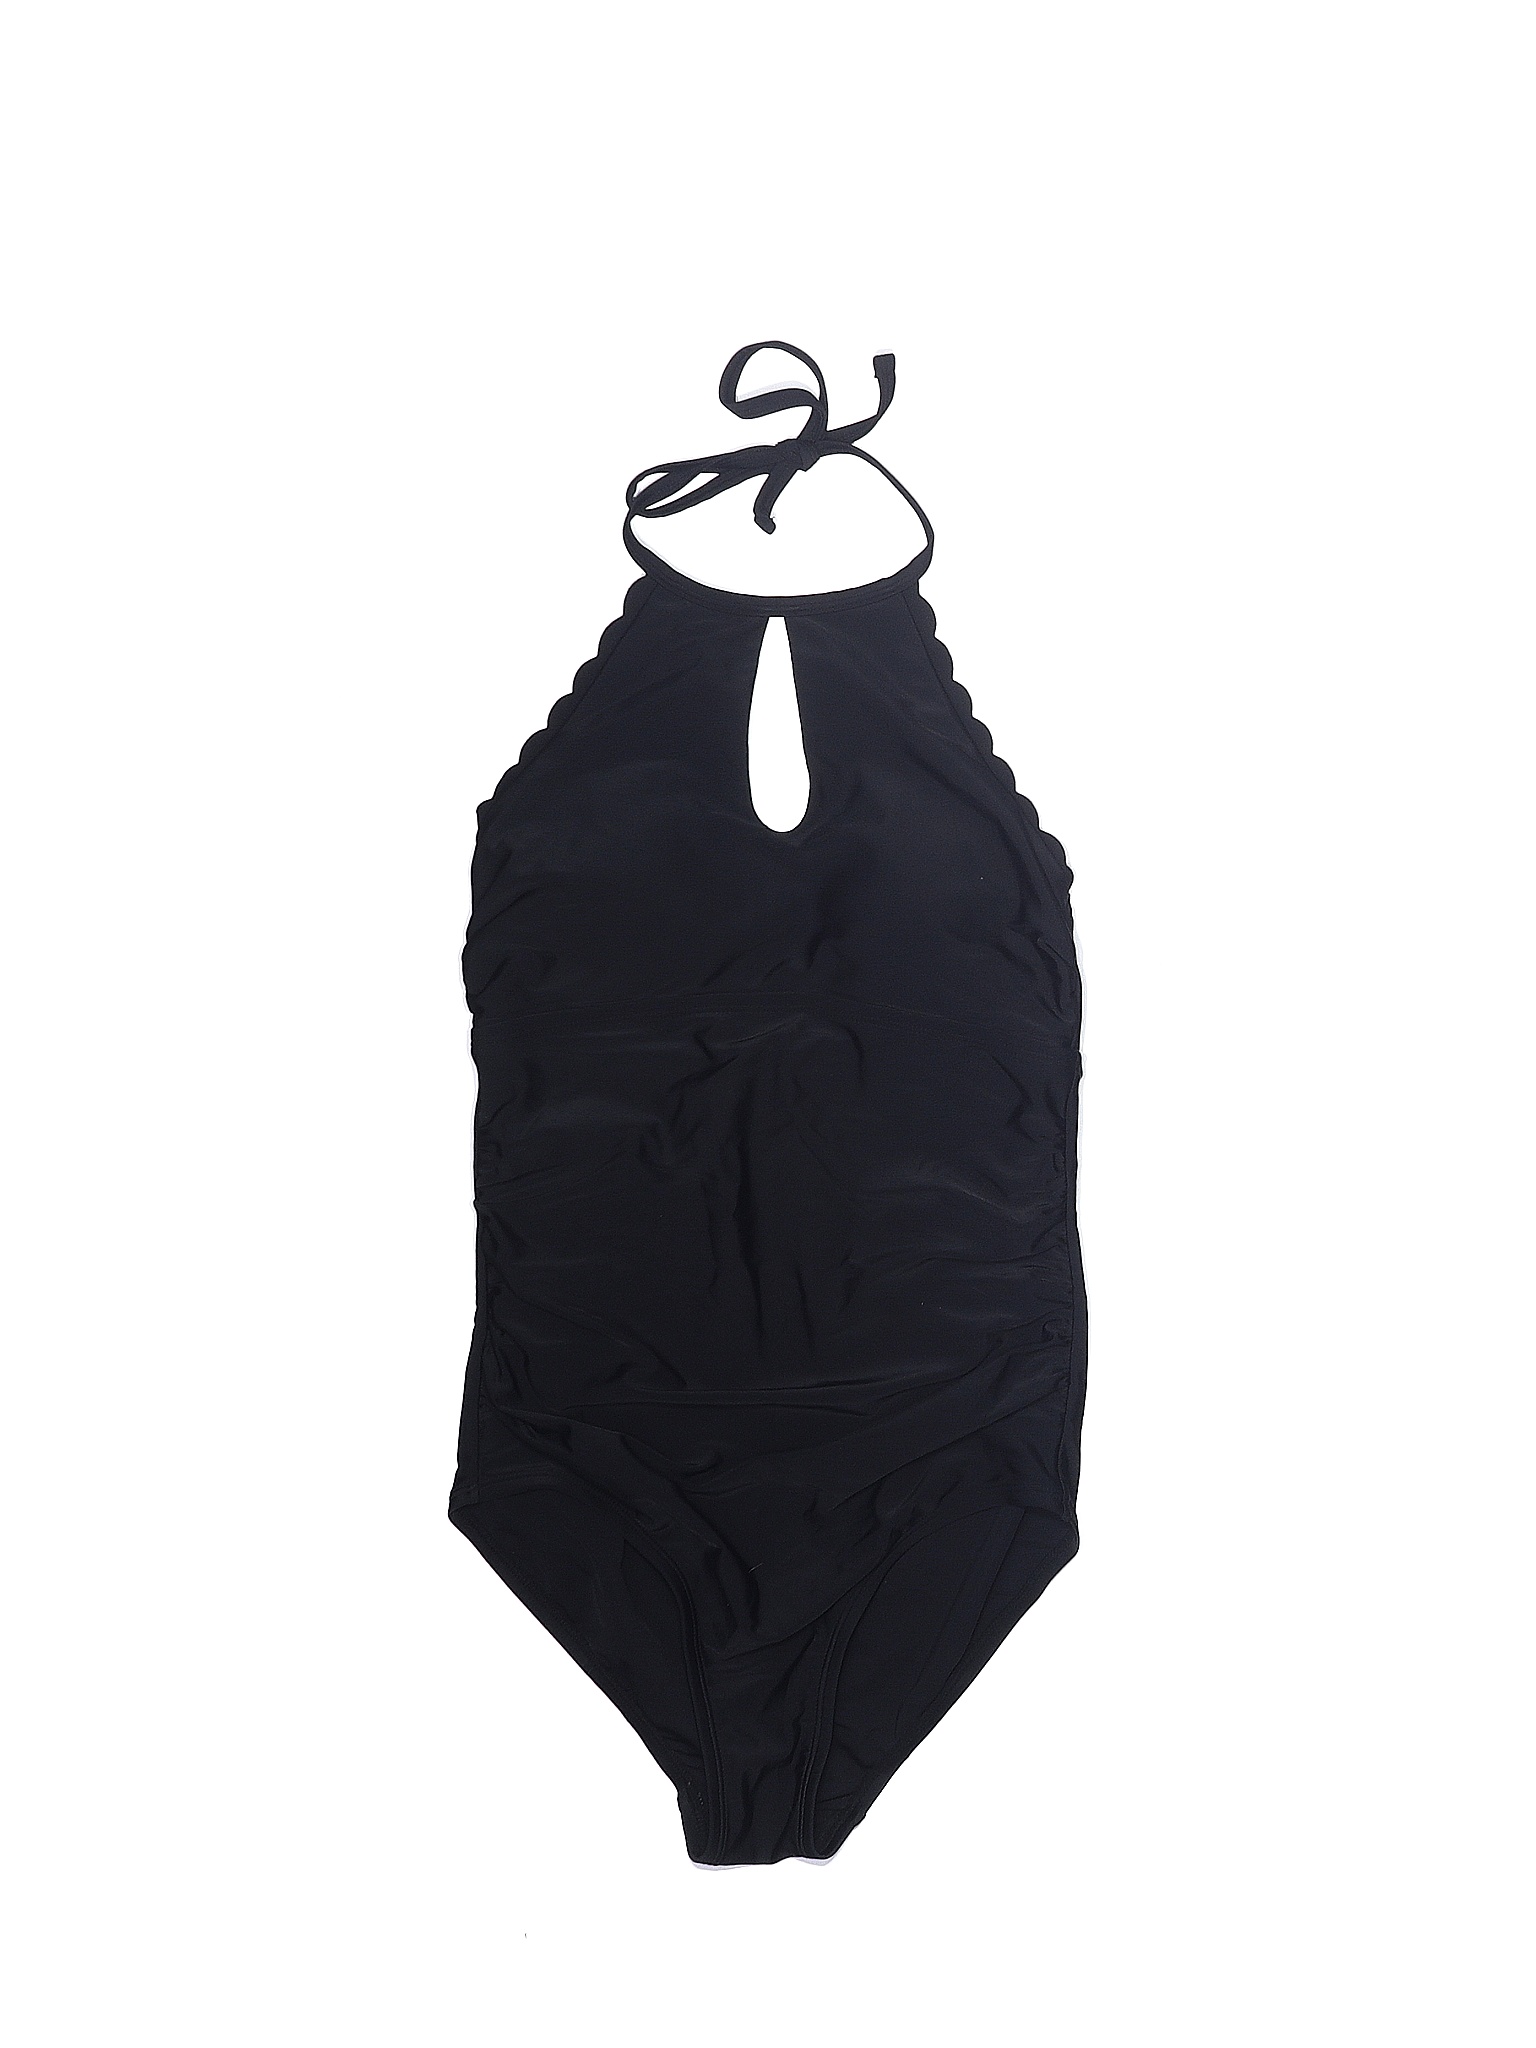 Kona Sol 100% Recycled Plastic Solid Black One Piece Swimsuit Size S ...